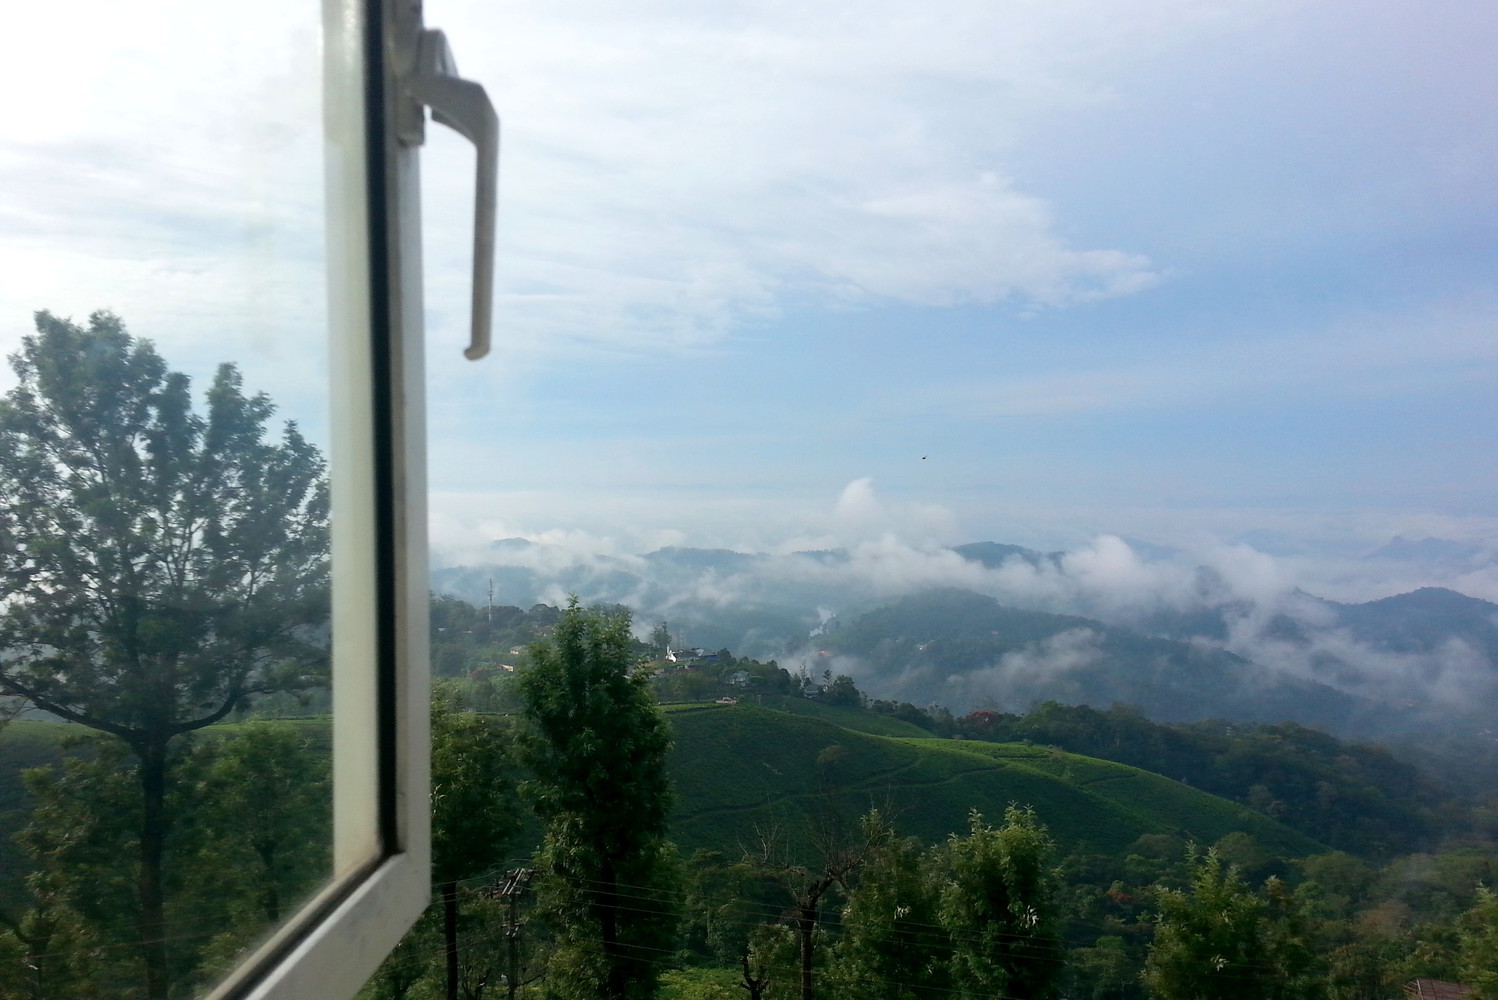 Sky and hills visible through a window and a window pane on the left side